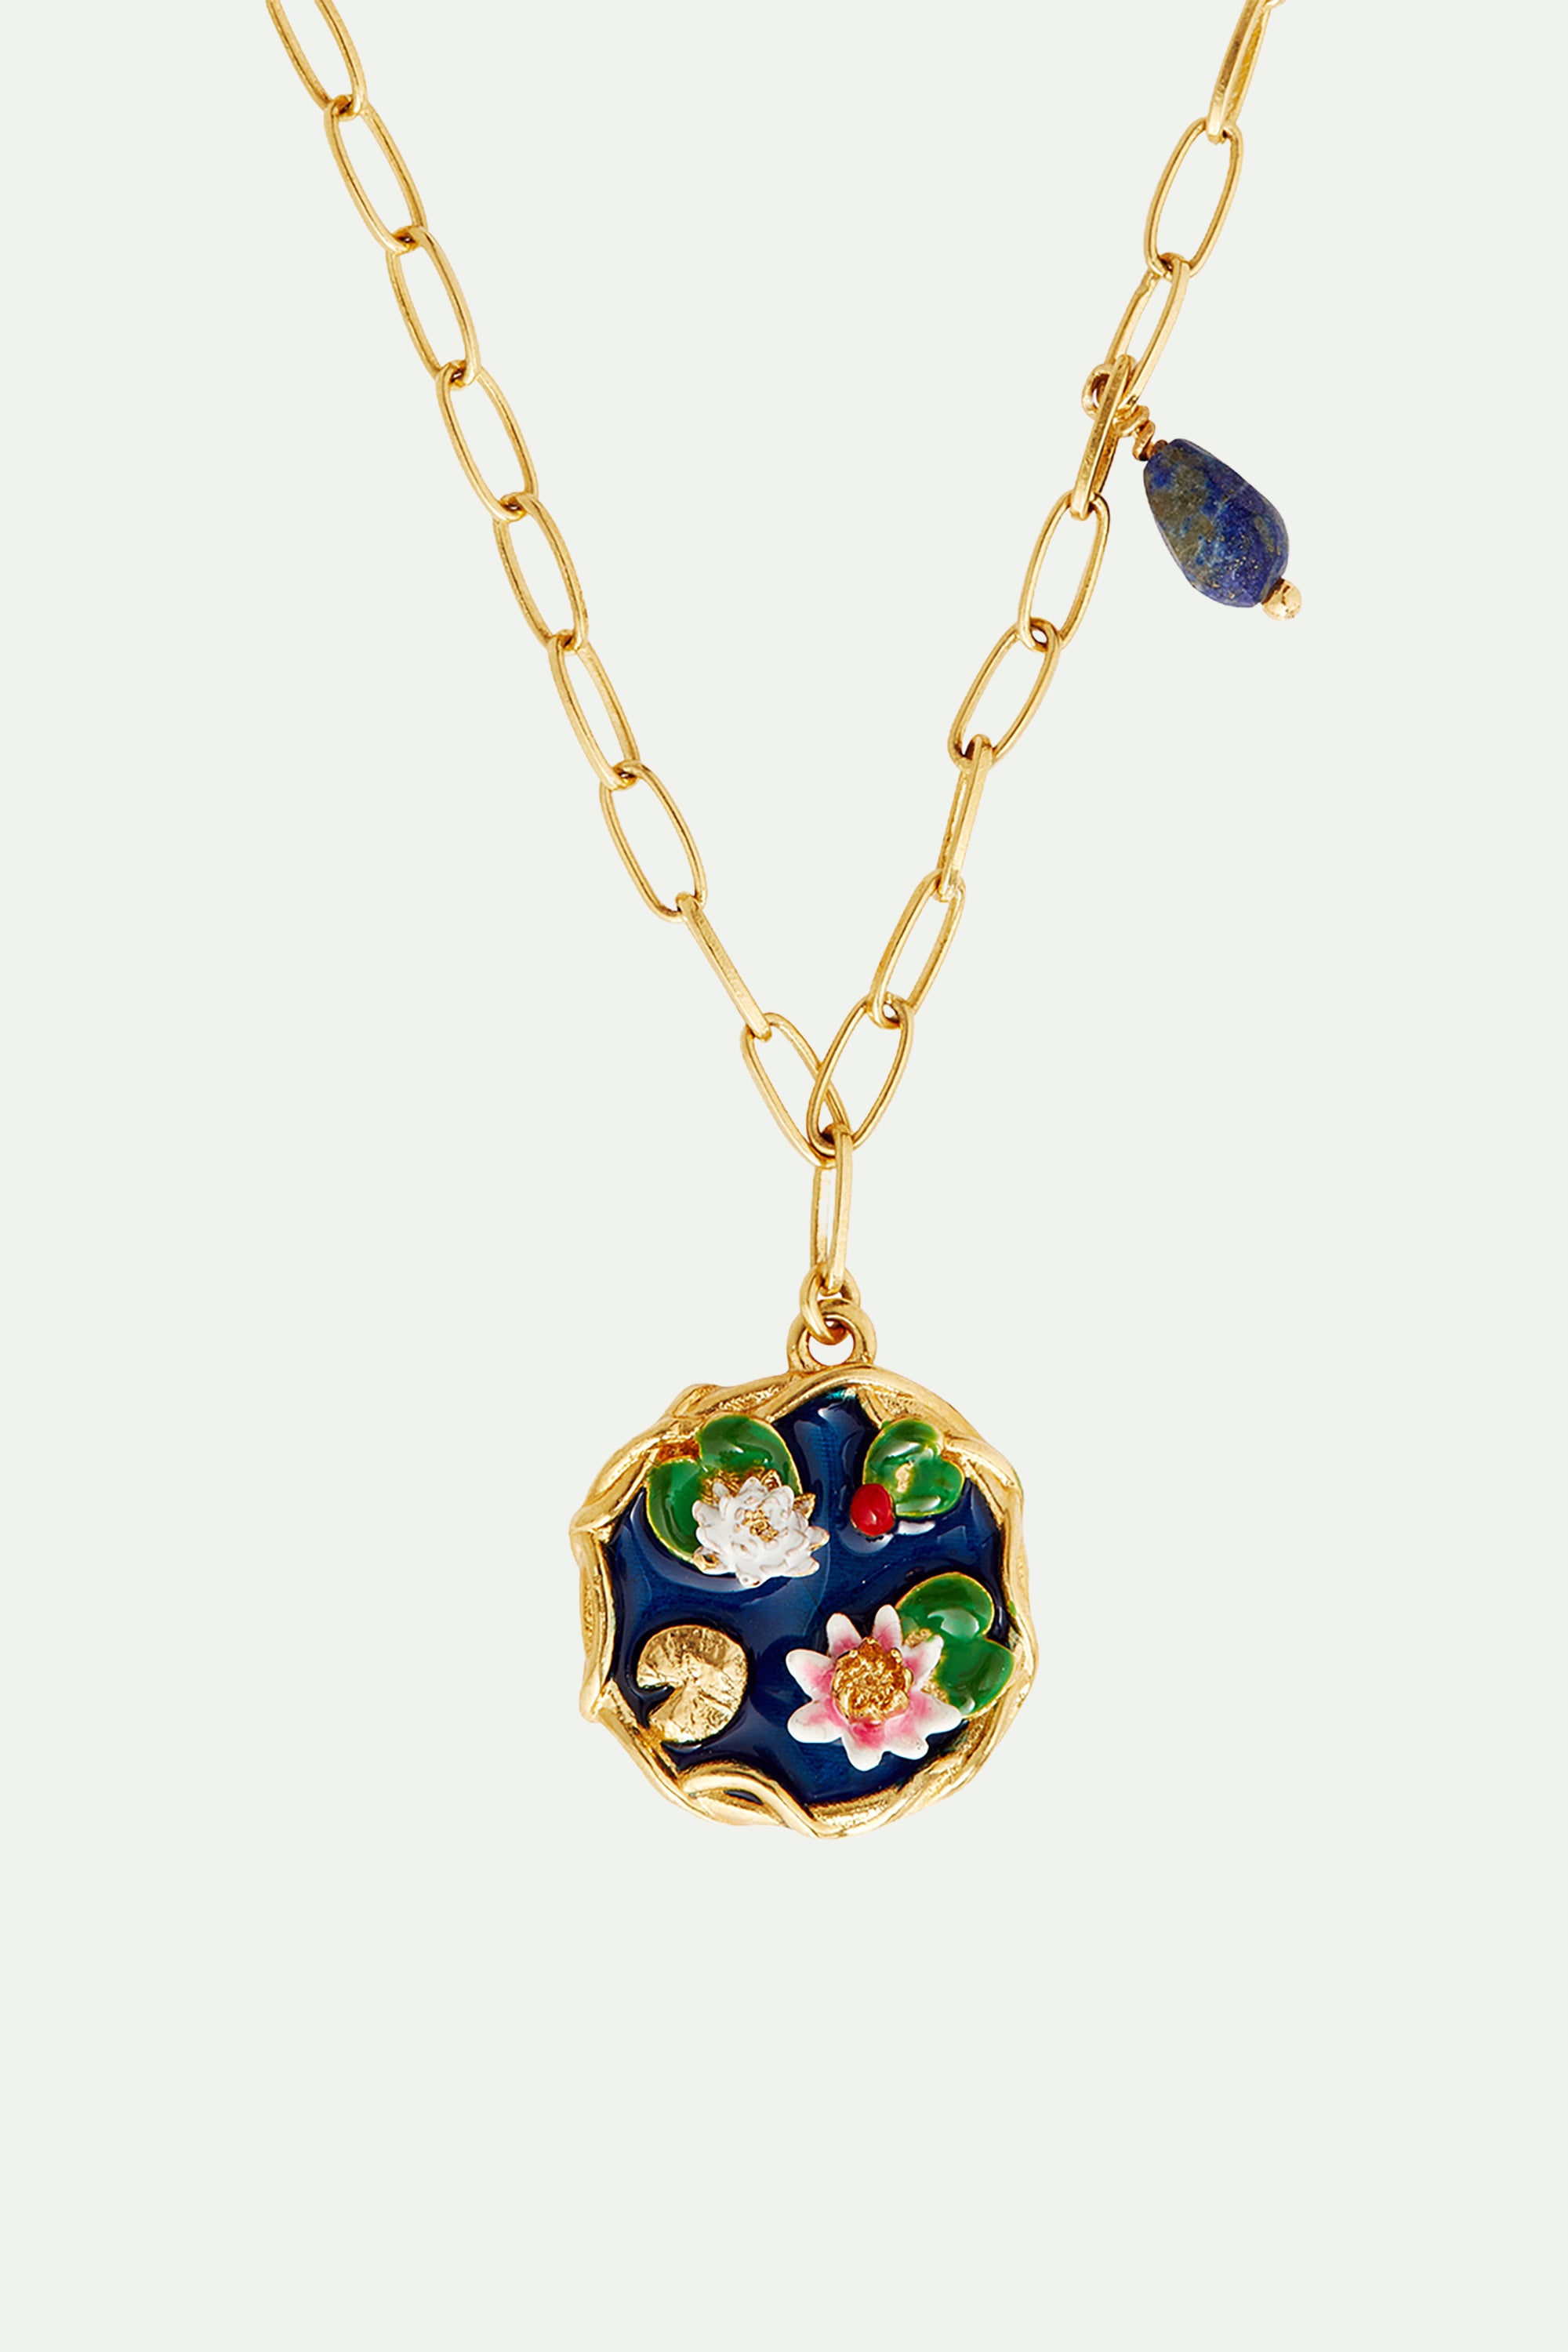 Giverny pond and lapis lazuli pendant necklace